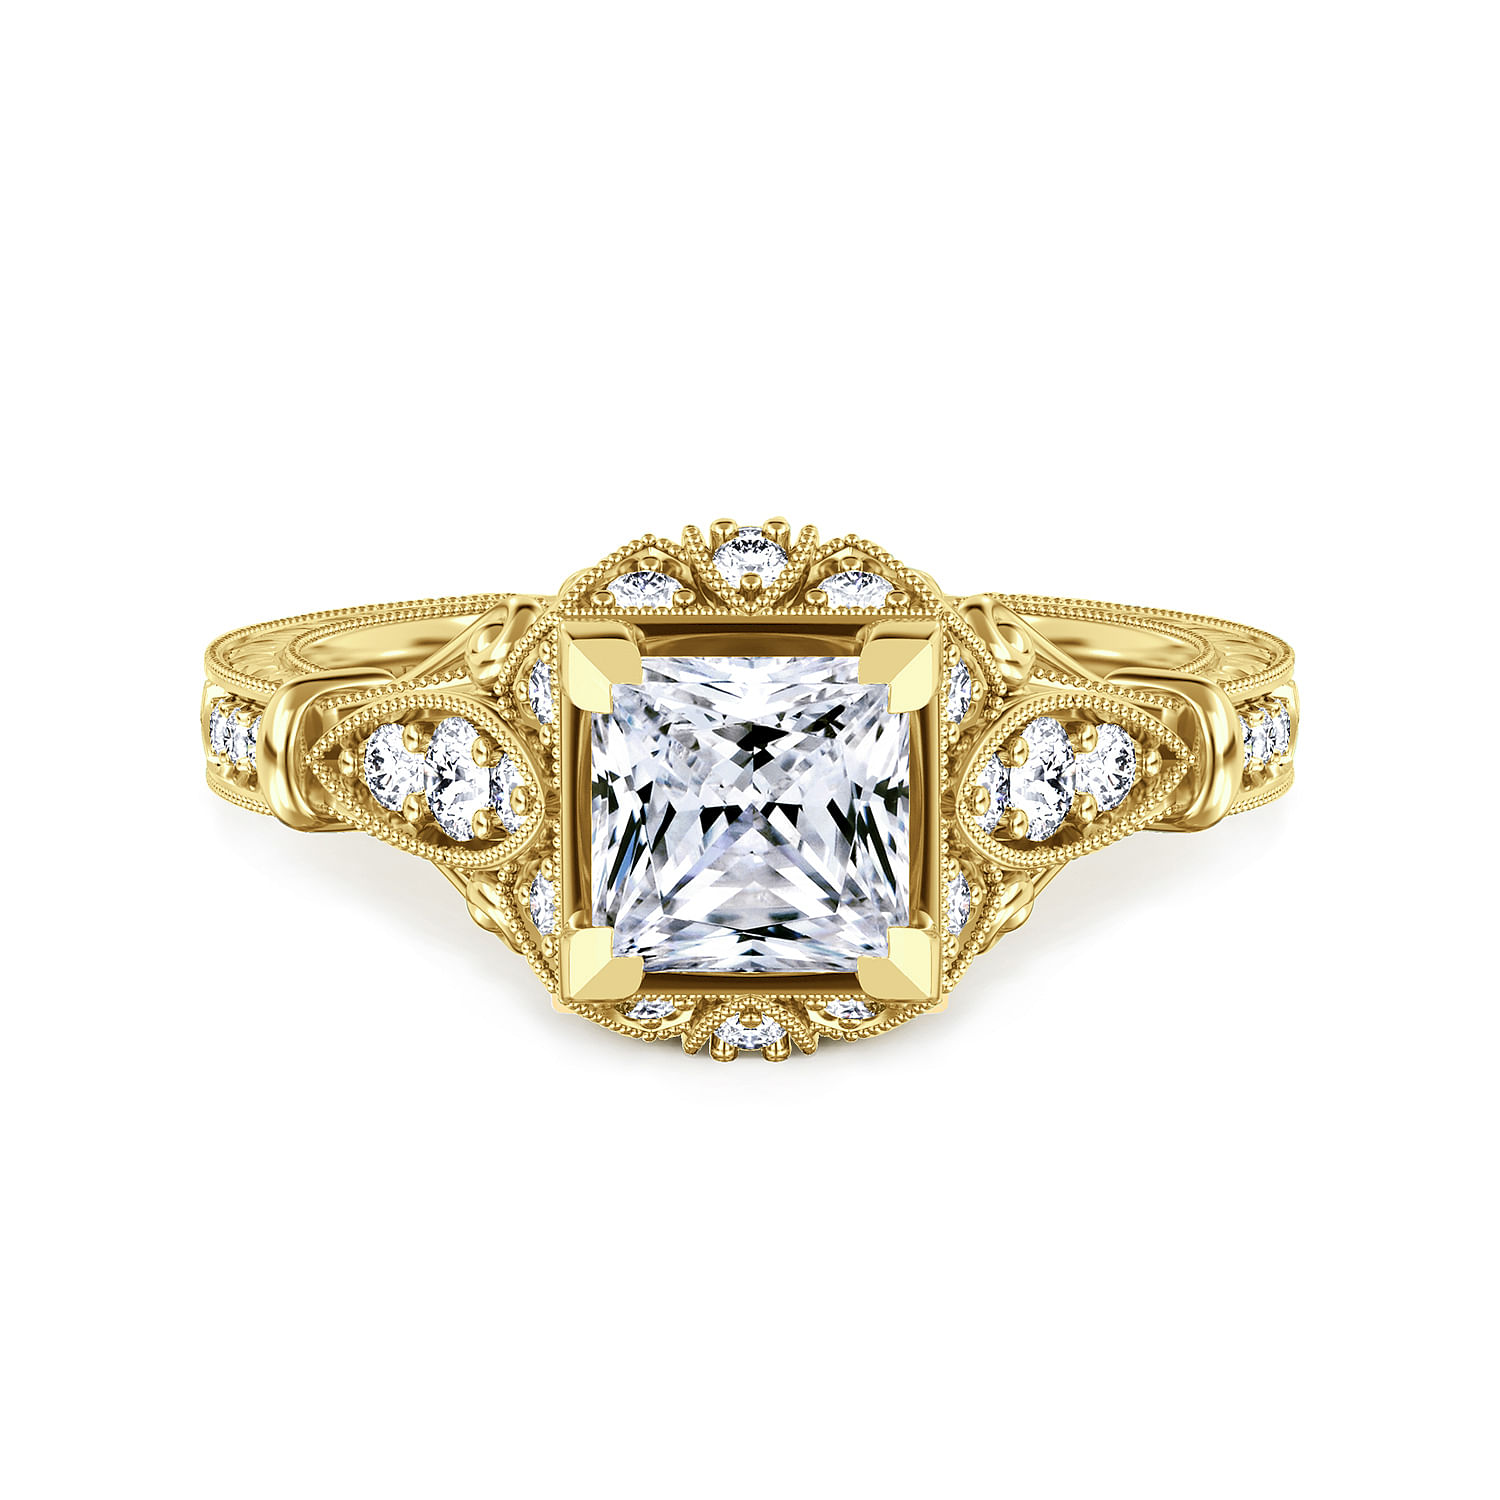 Montgomery - Unique 14K Yellow Gold Vintage Inspired Princess Cut Halo Diamond Engagement Ring